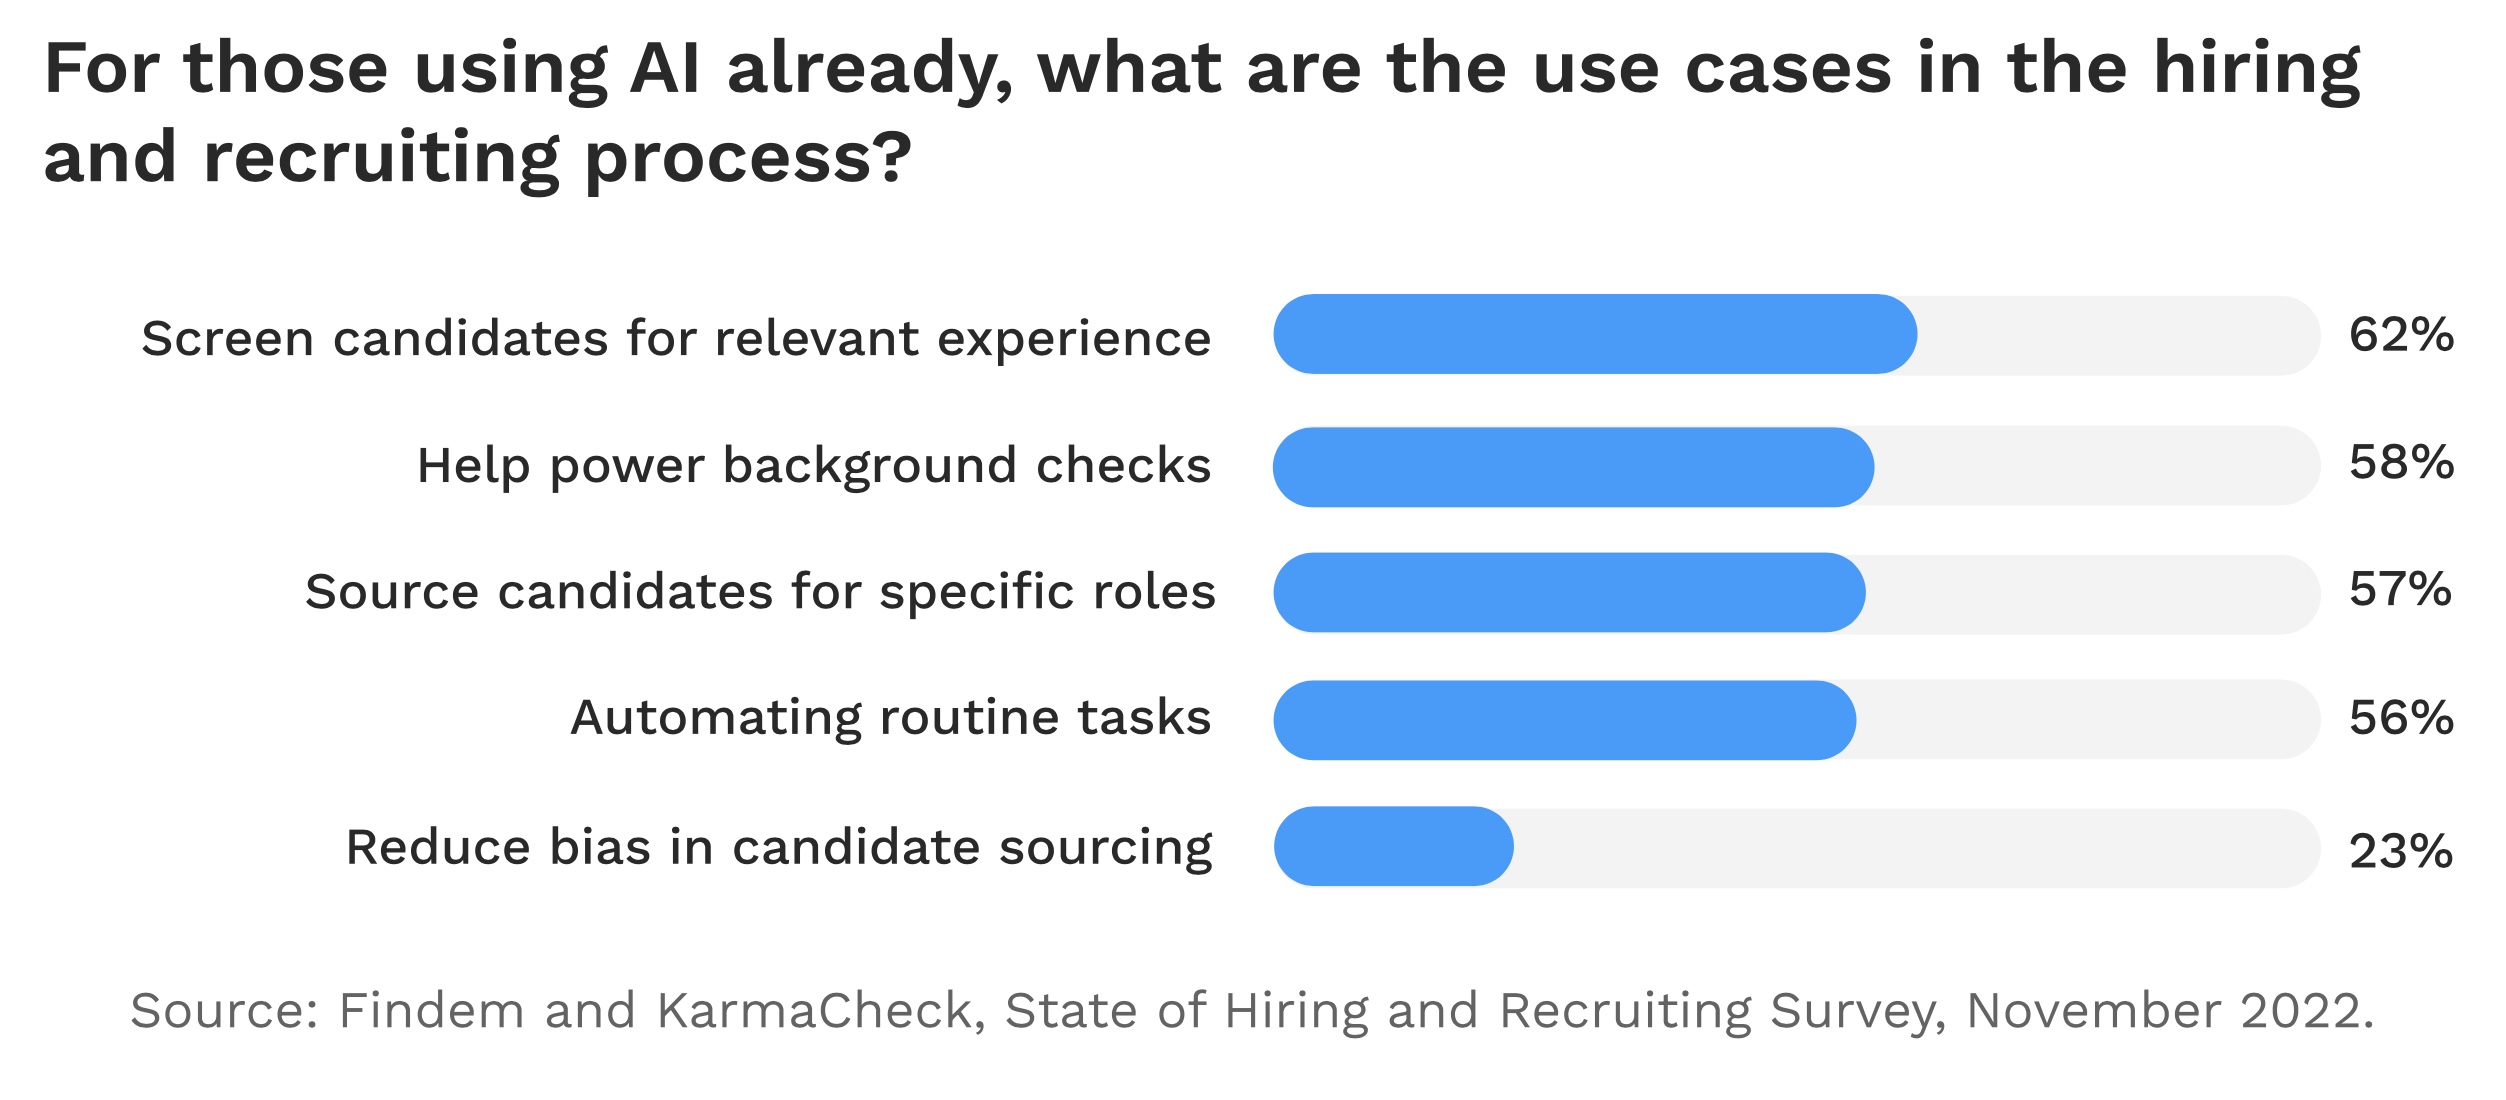 AI Use Cases for Hiring and Recruiting